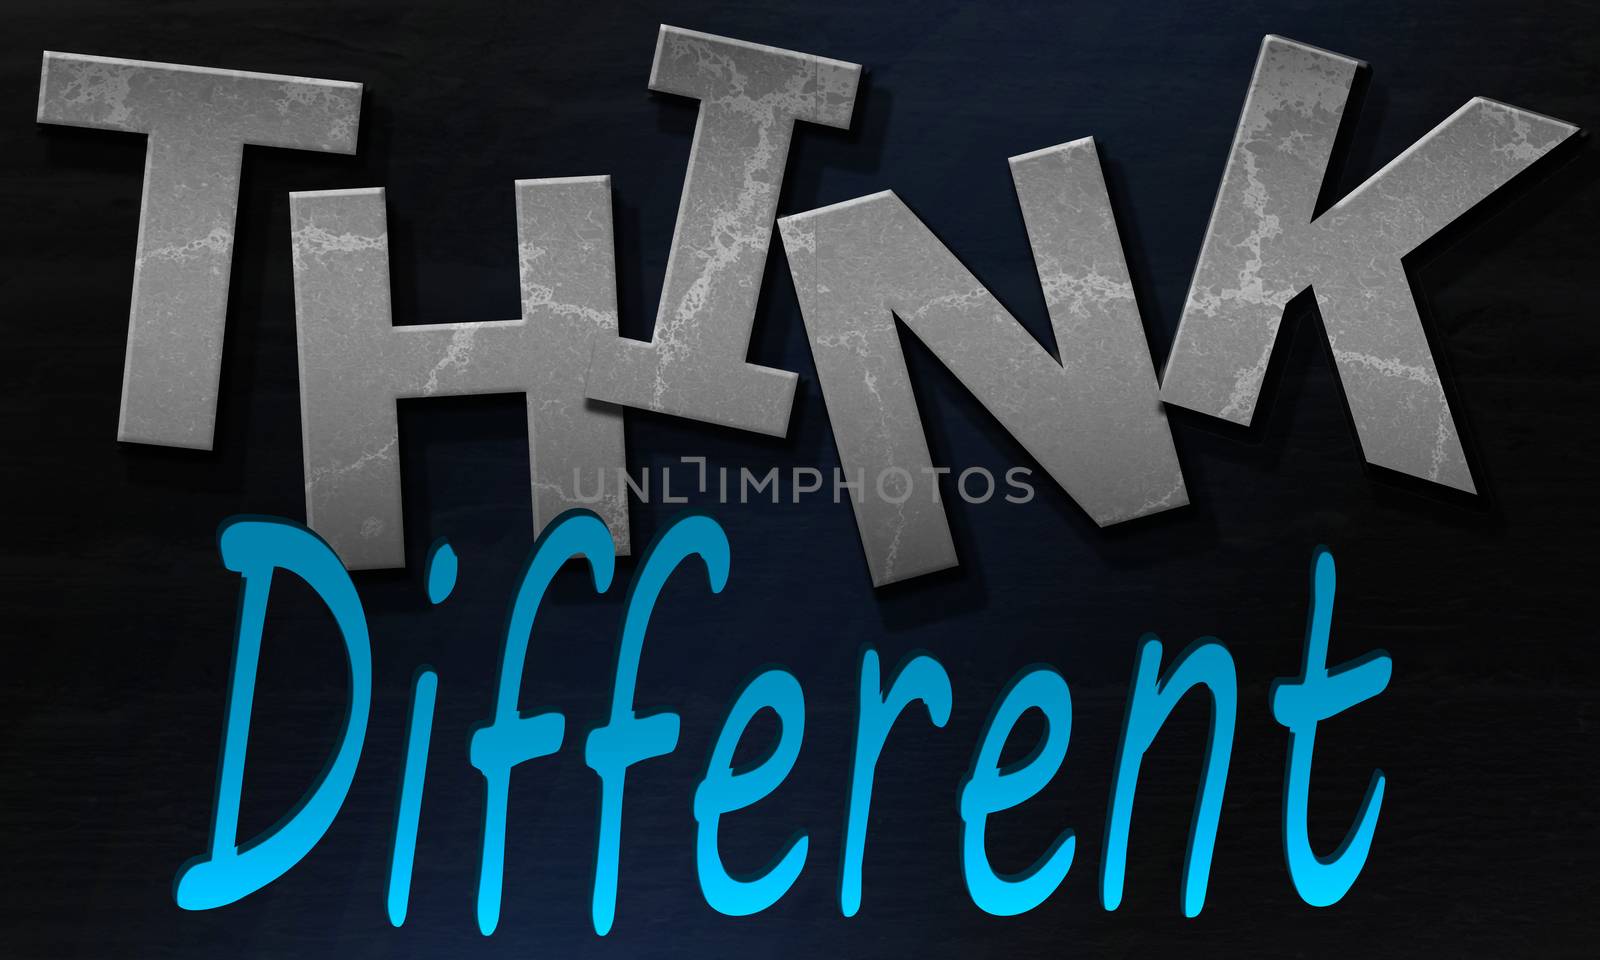 Think different inspirational quote and text, 3d rendering